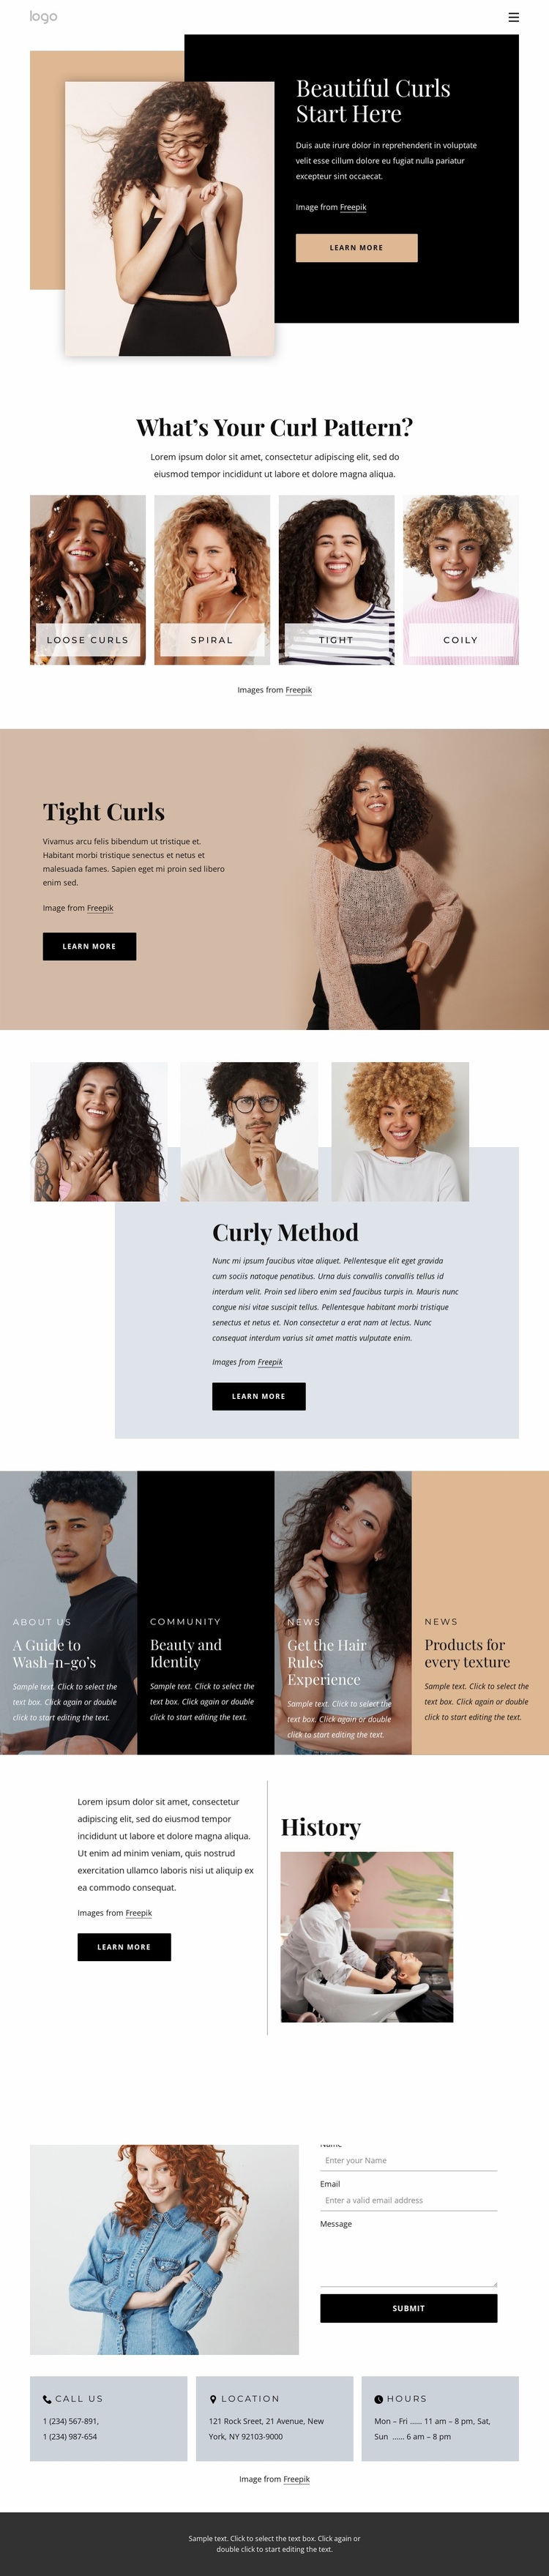 Bring out the best in your curls Website Design